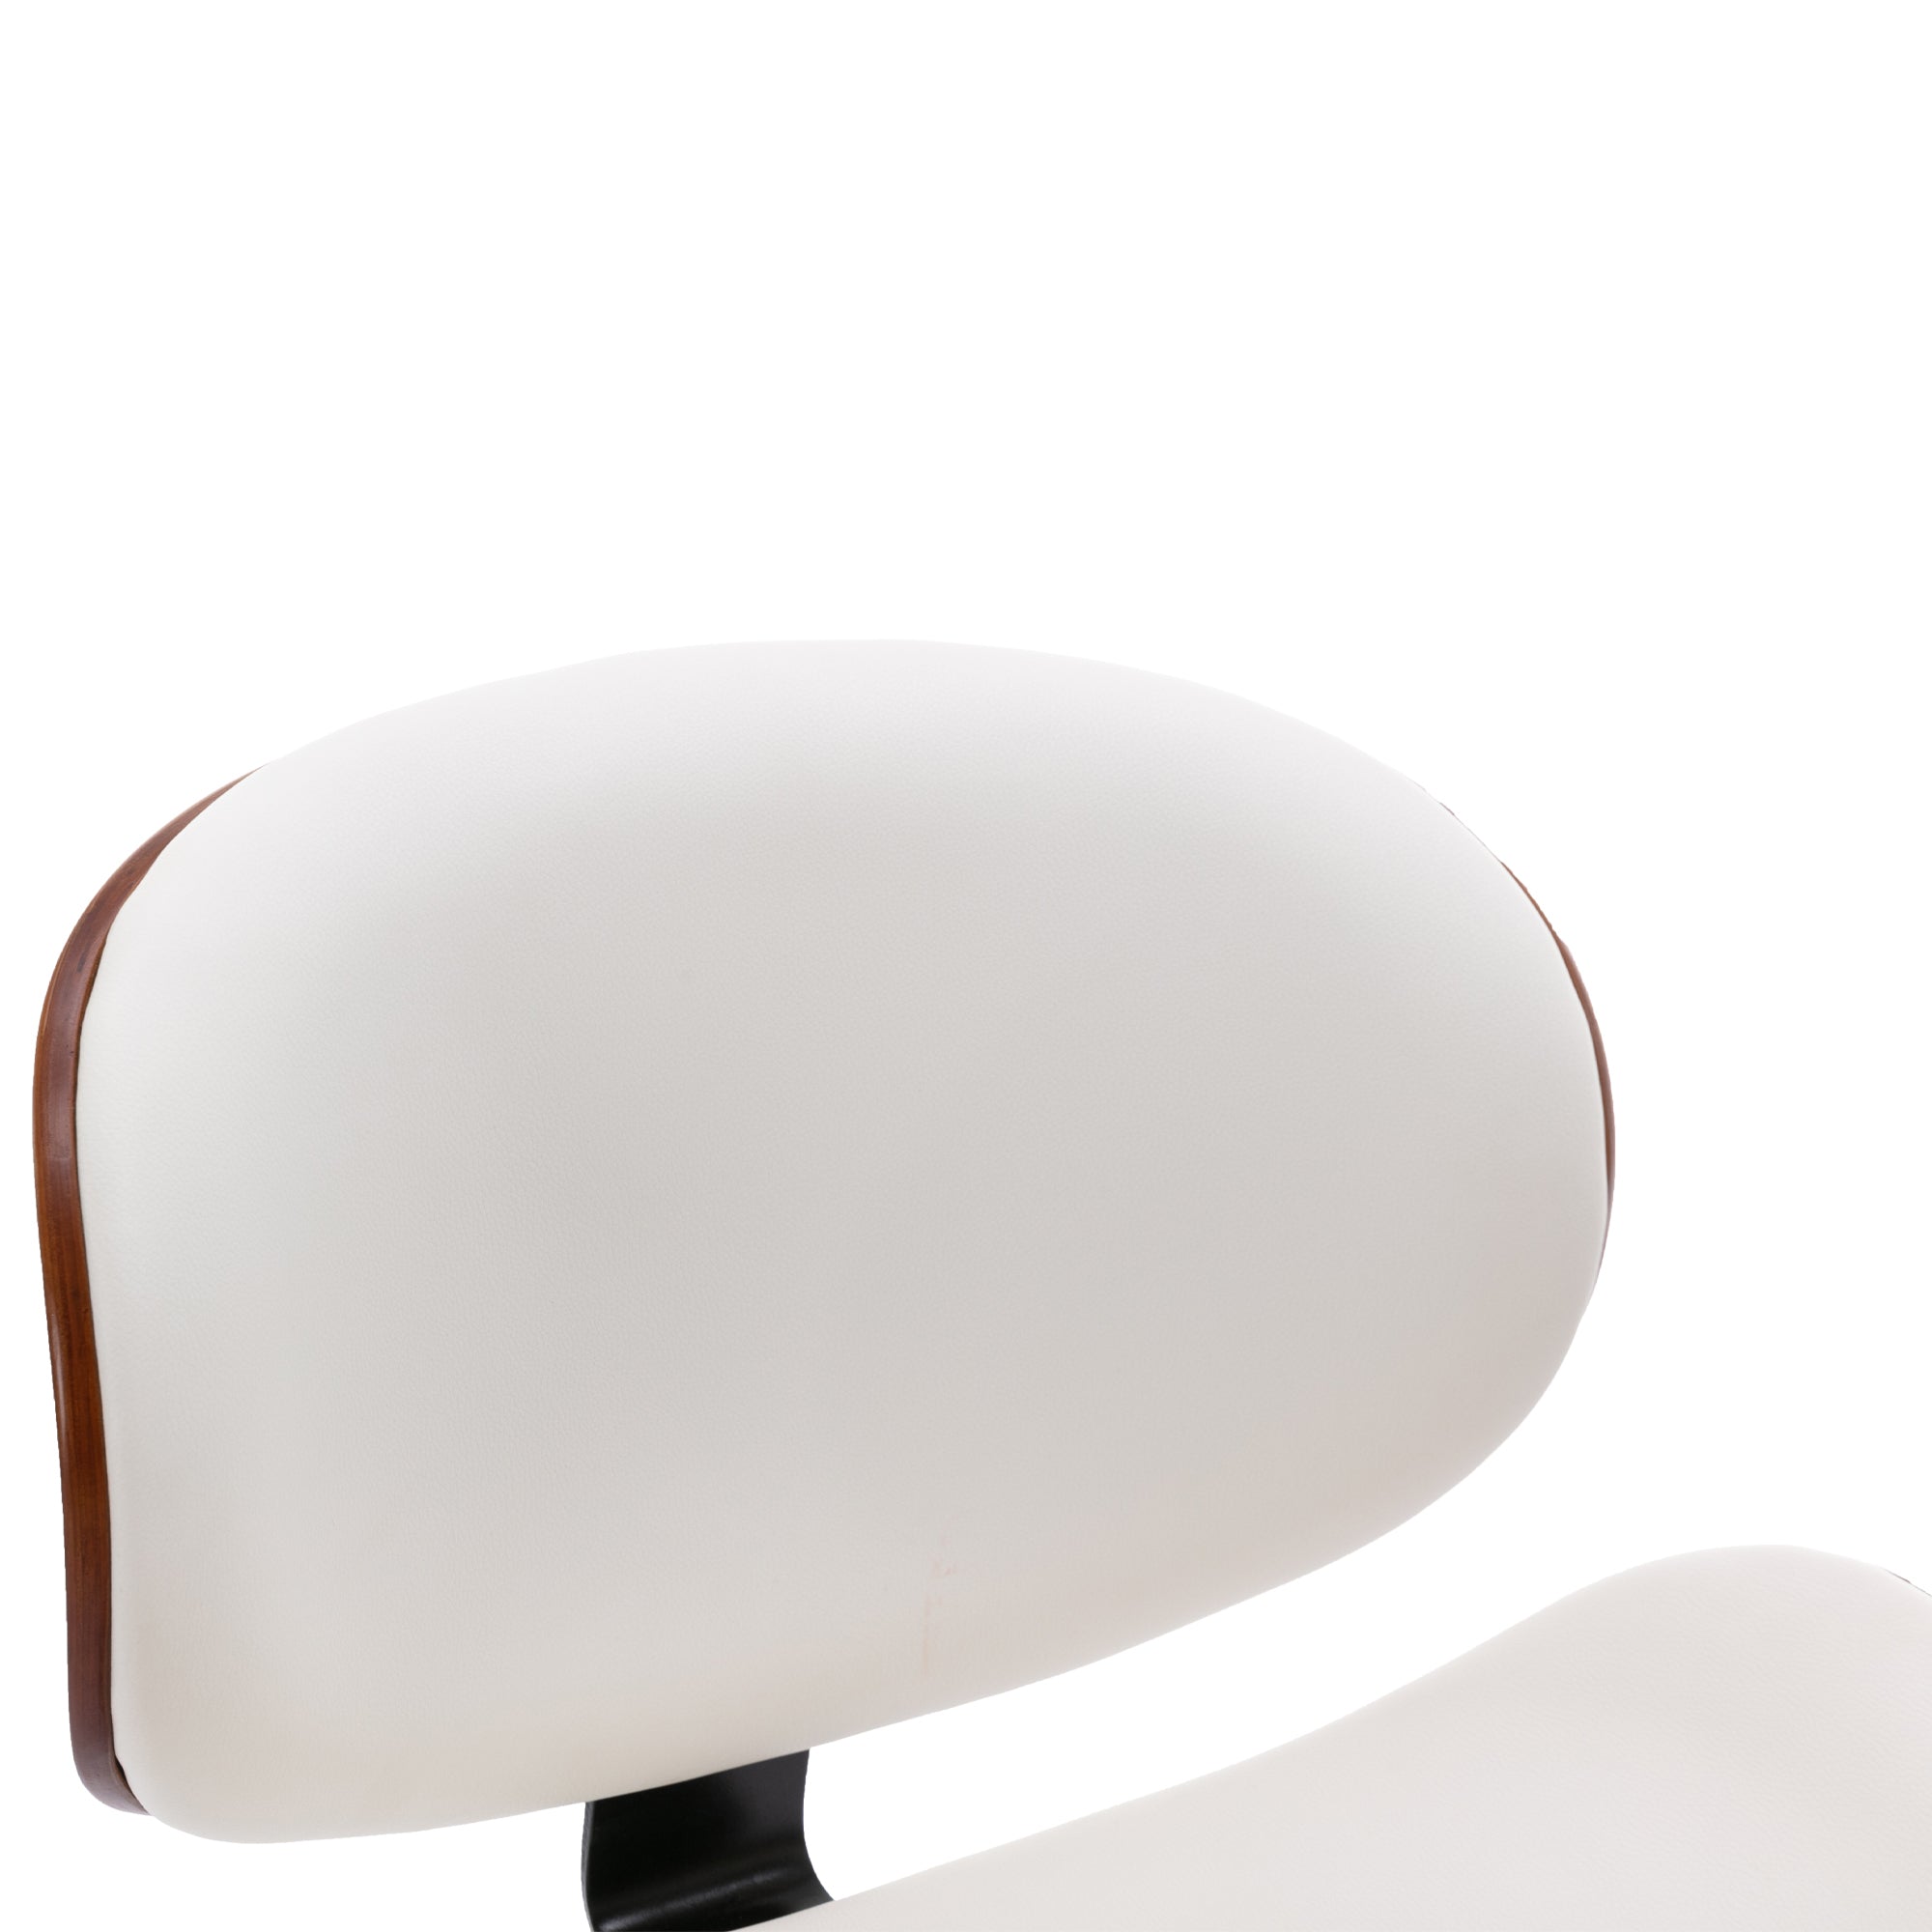 Set of 2 Modern Swivel Adjustable Barstools with Walnut Curved Back and White Faux Leather